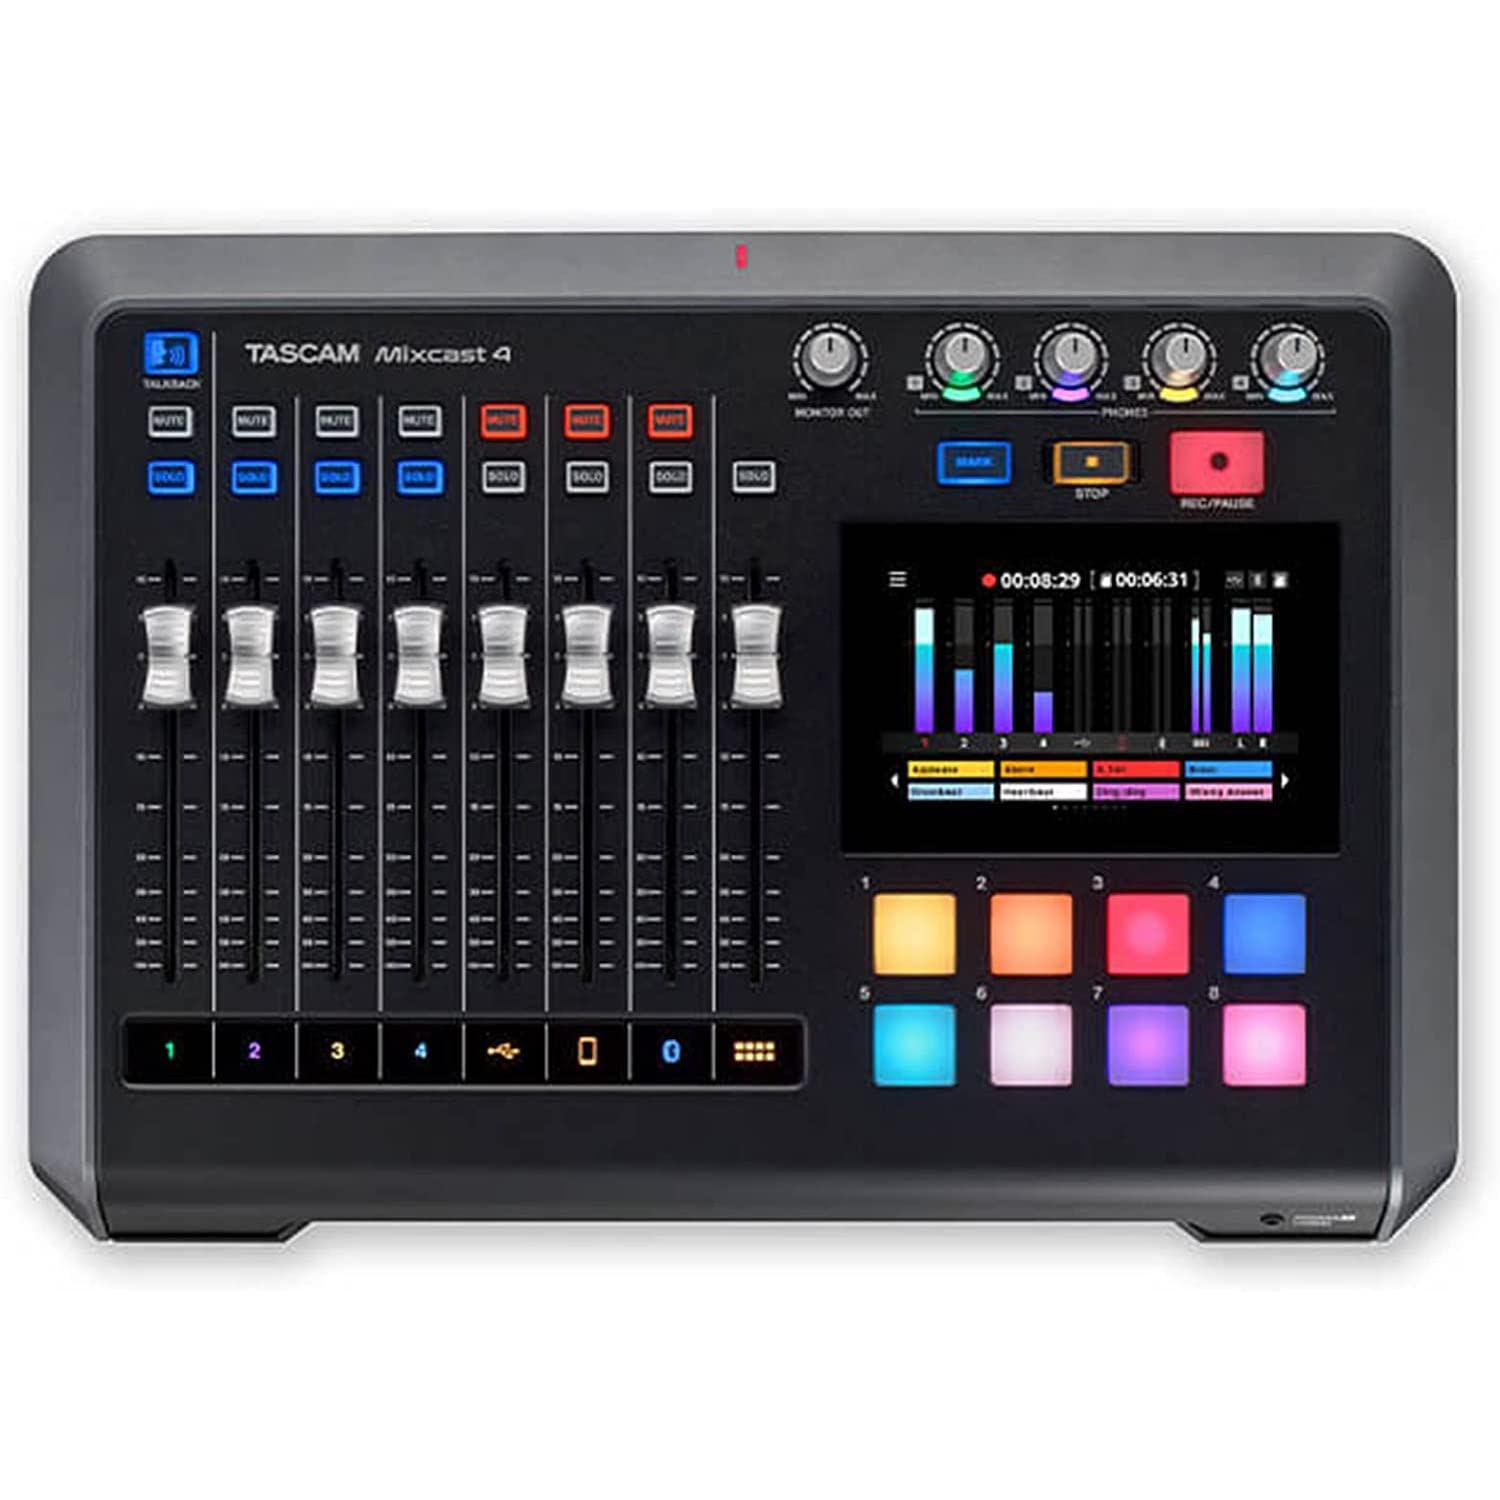 Tascam - Mixcast 4 Podcast Studio Mixer Station with built-in 14-track Recorder / USB Audio Interface, Streaming, Bluetooth